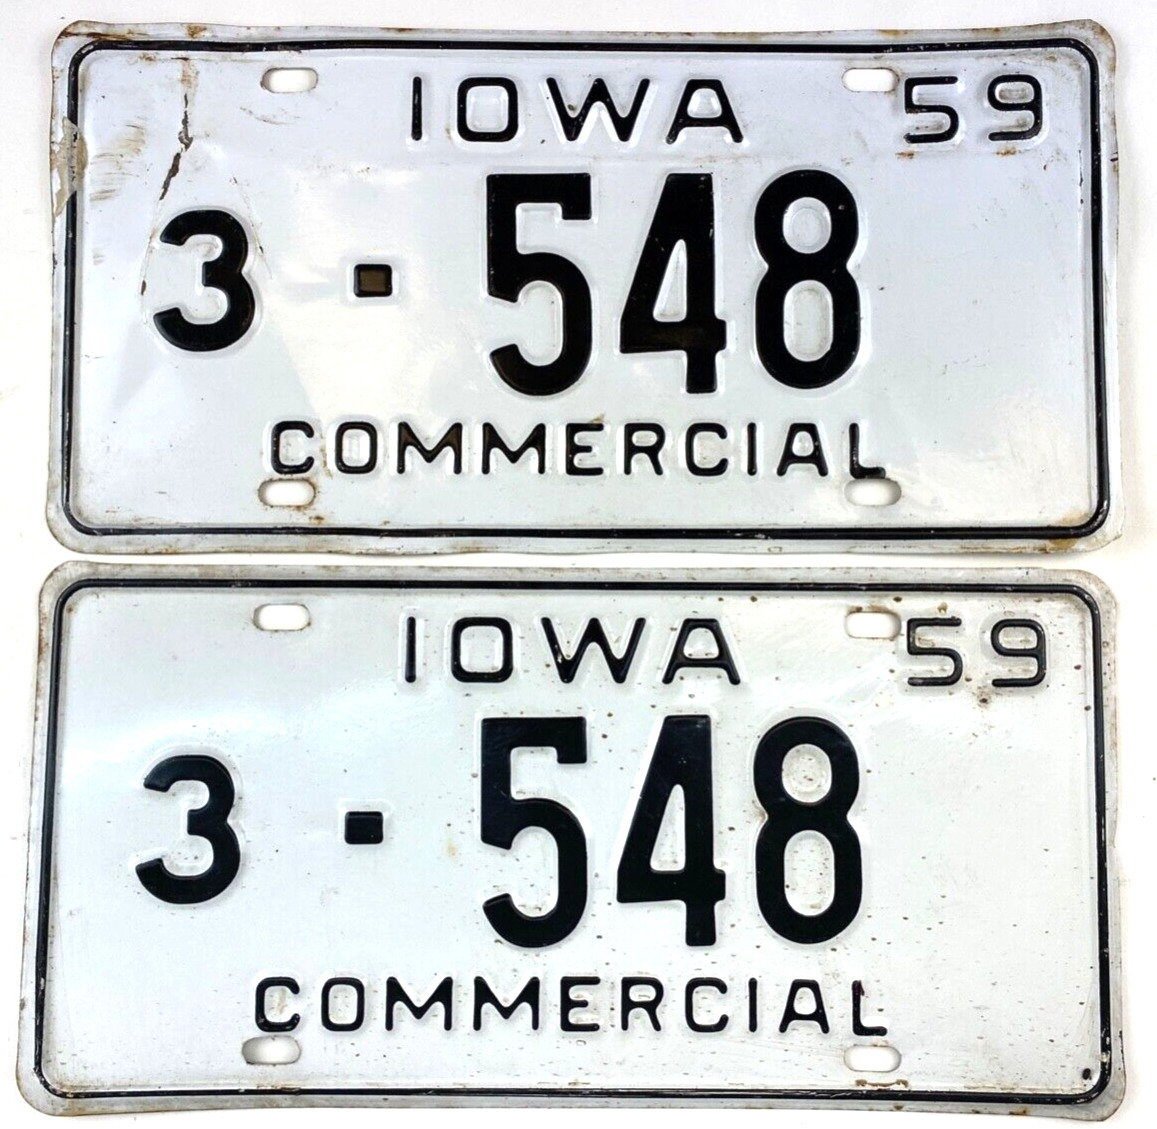 Iowa 1959 License Plate Commercial Truck Set Allamakee Co Vintage Wall Decor